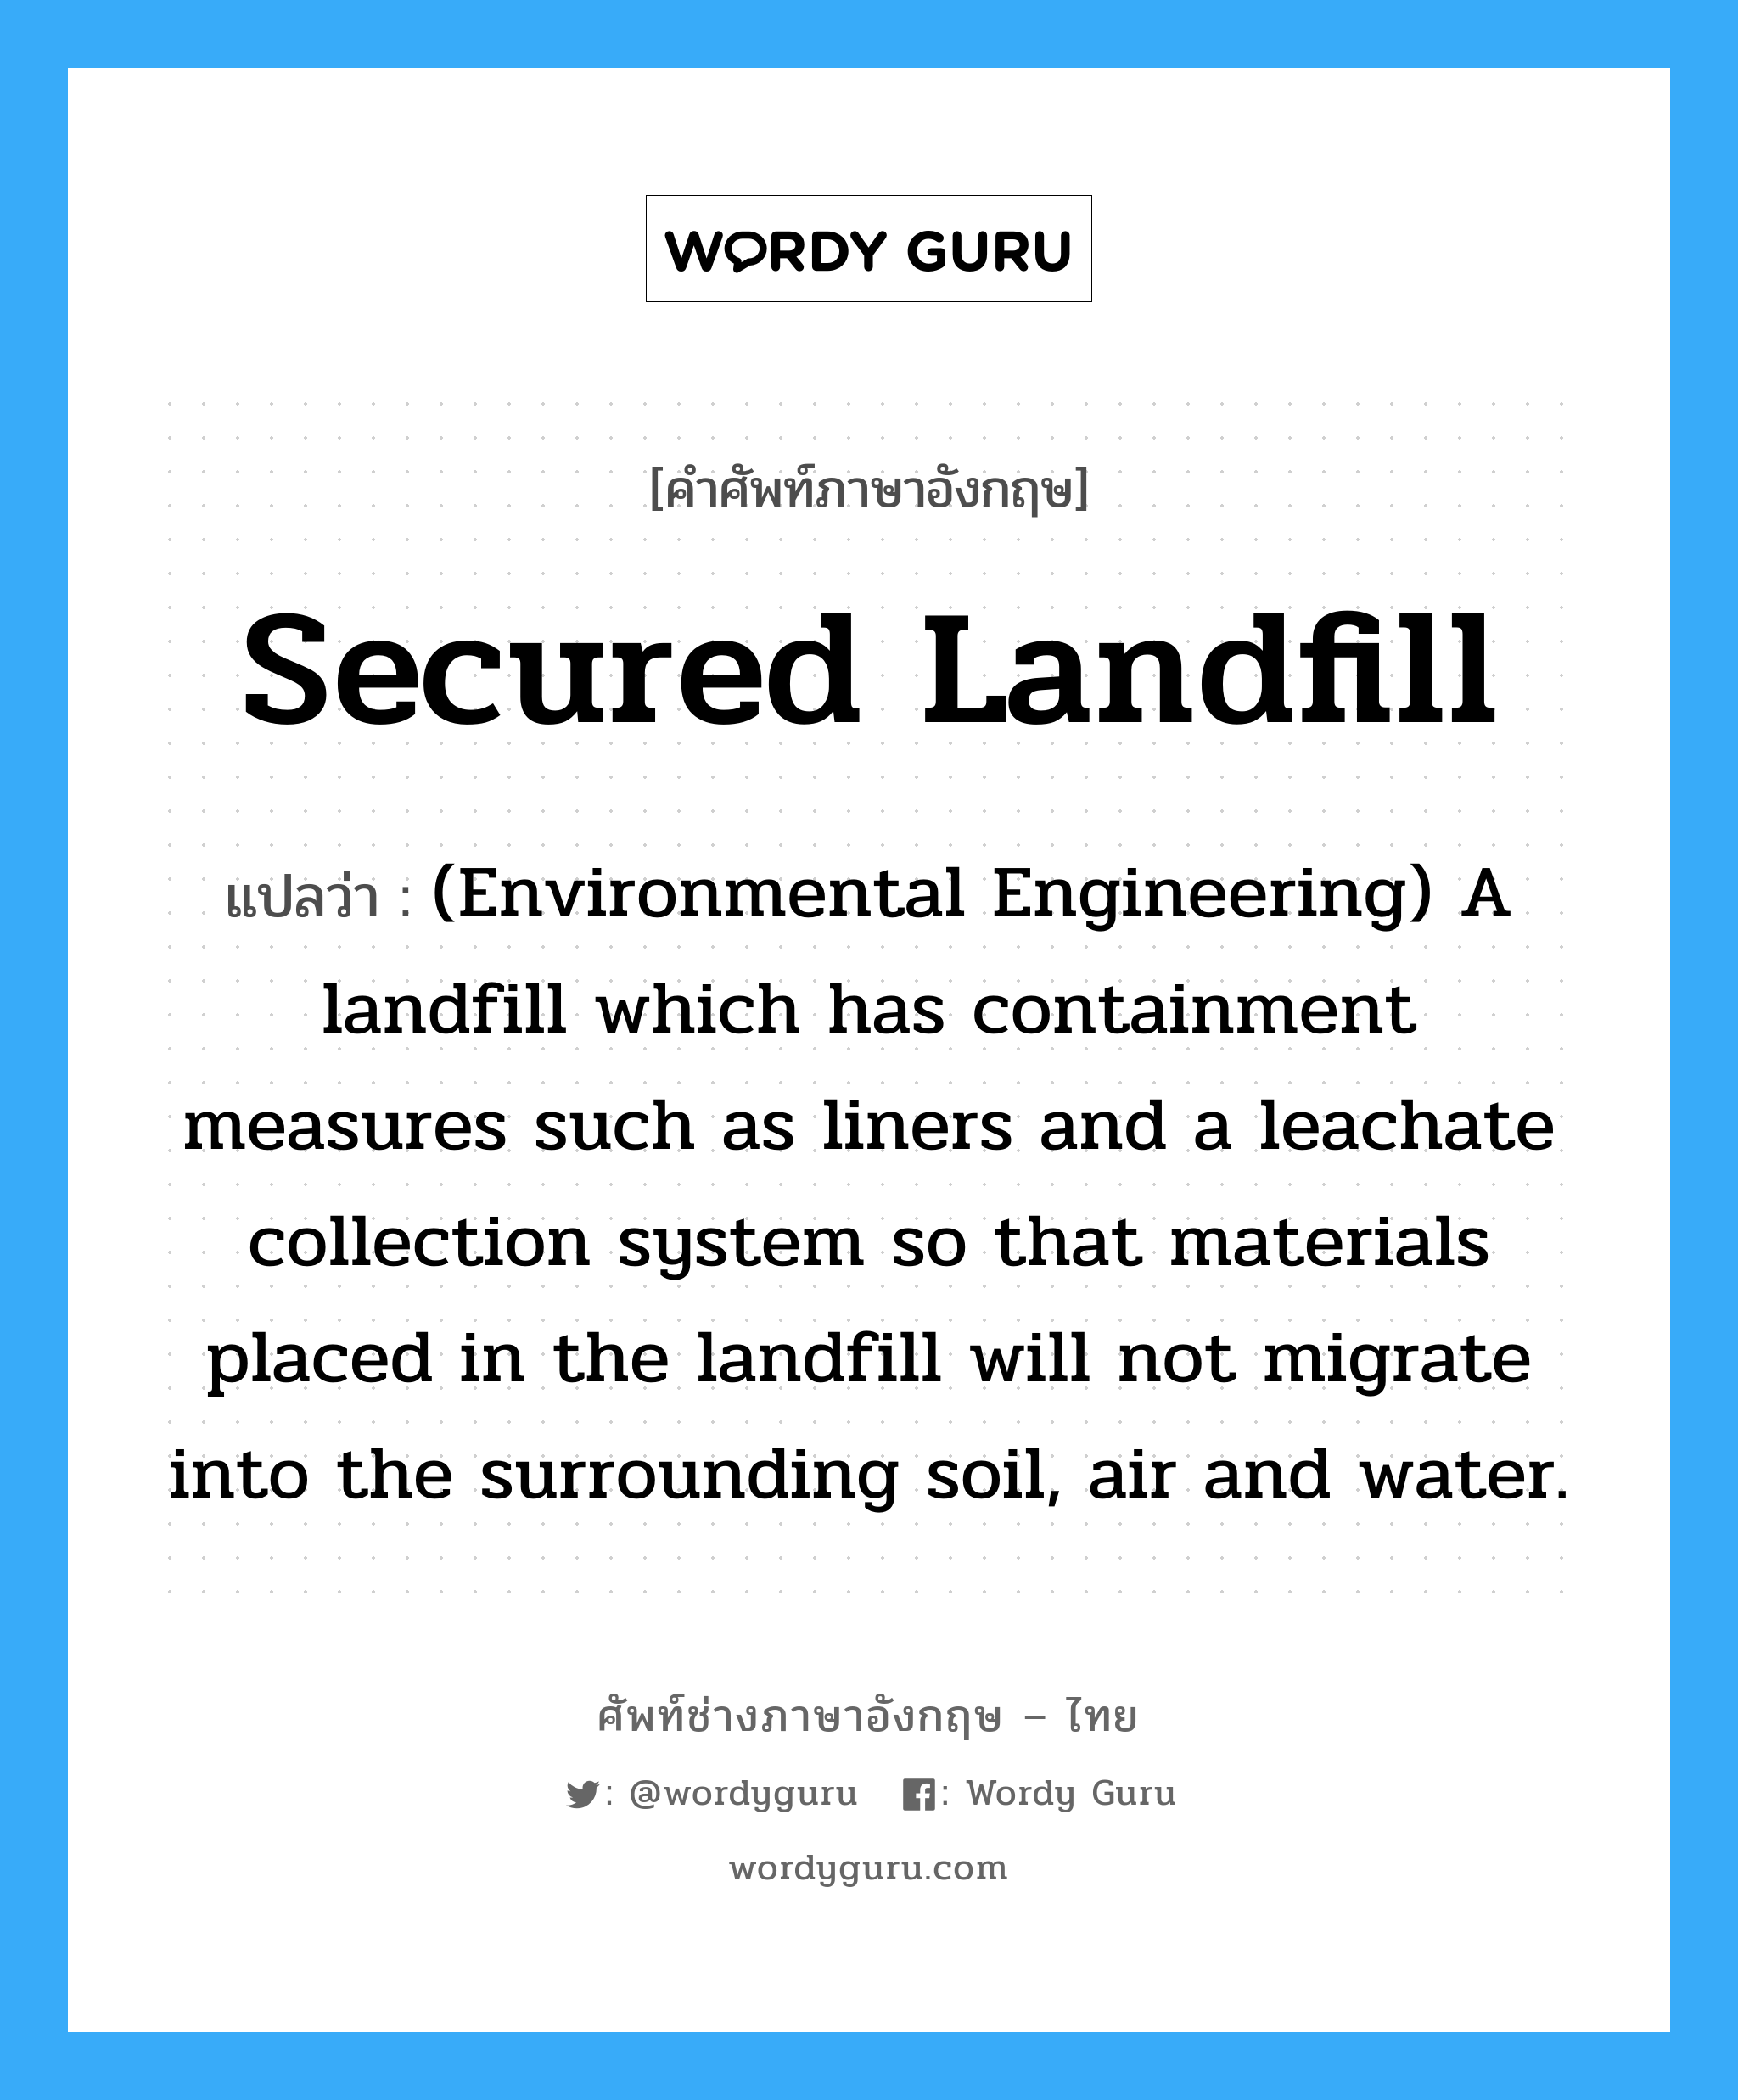 Secured landfill แปลว่า?, คำศัพท์ช่างภาษาอังกฤษ - ไทย Secured landfill คำศัพท์ภาษาอังกฤษ Secured landfill แปลว่า (Environmental Engineering) A landfill which has containment measures such as liners and a leachate collection system so that materials placed in the landfill will not migrate into the surrounding soil, air and water.